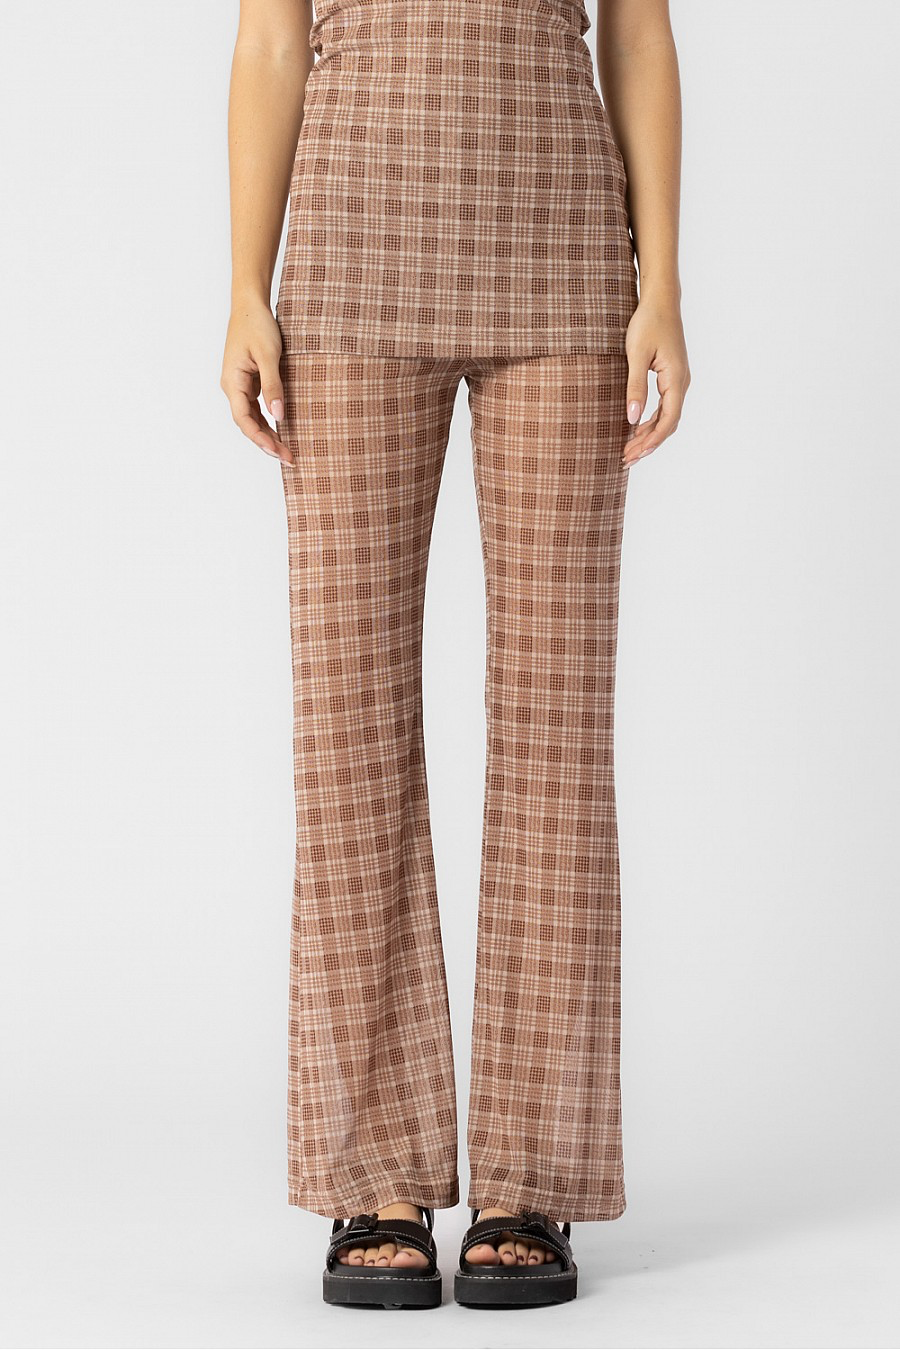 Checkered print pants in the color beige/brown.